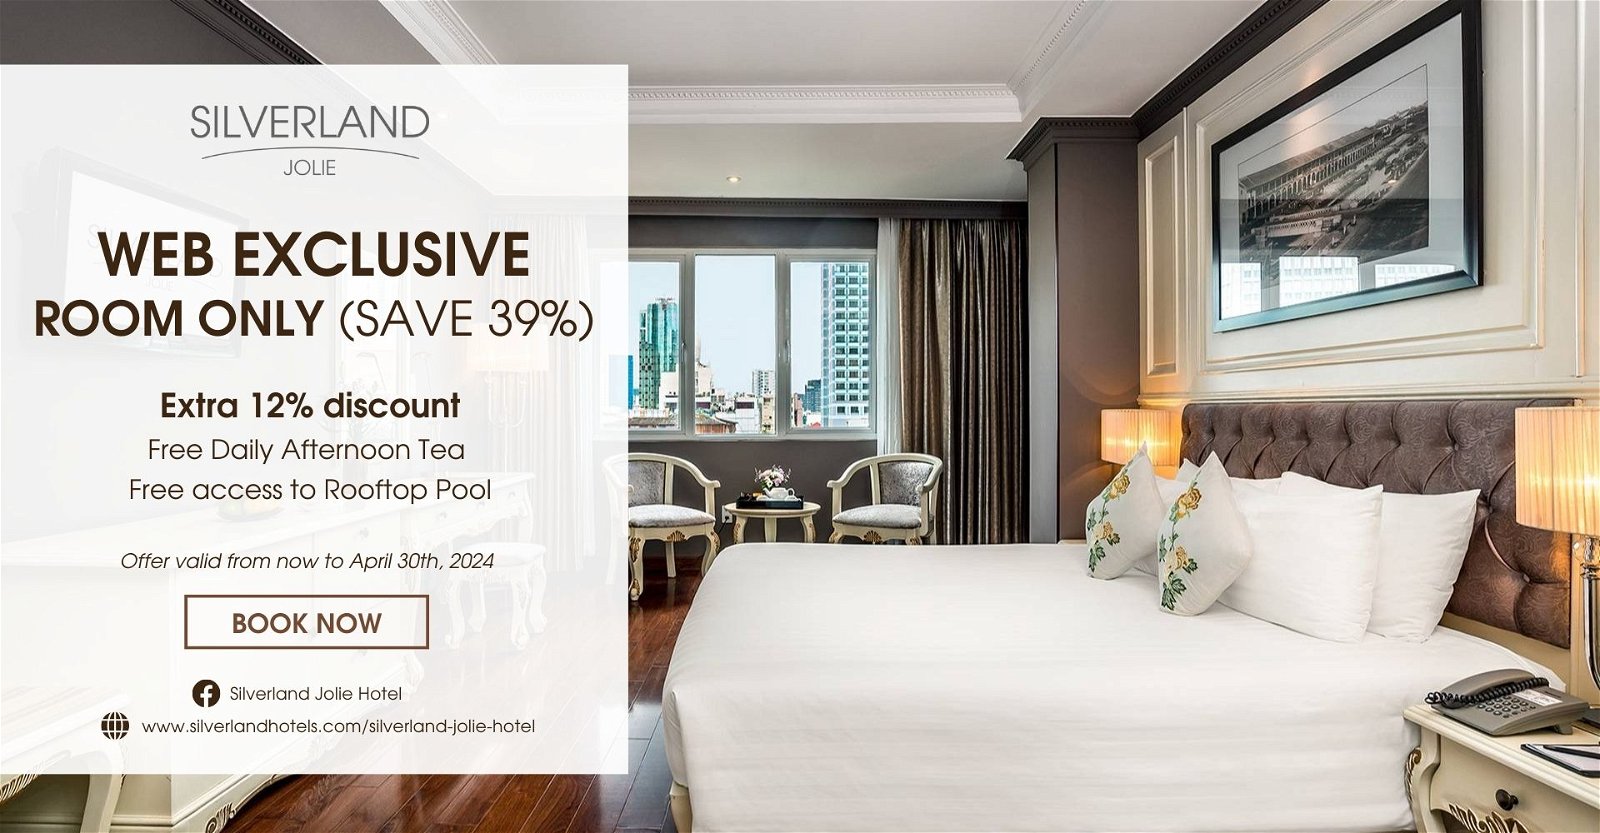 SILVERLAND JOLIE – WEB EXCLUSIVE – ROOM ONLY (SAVE 39%)